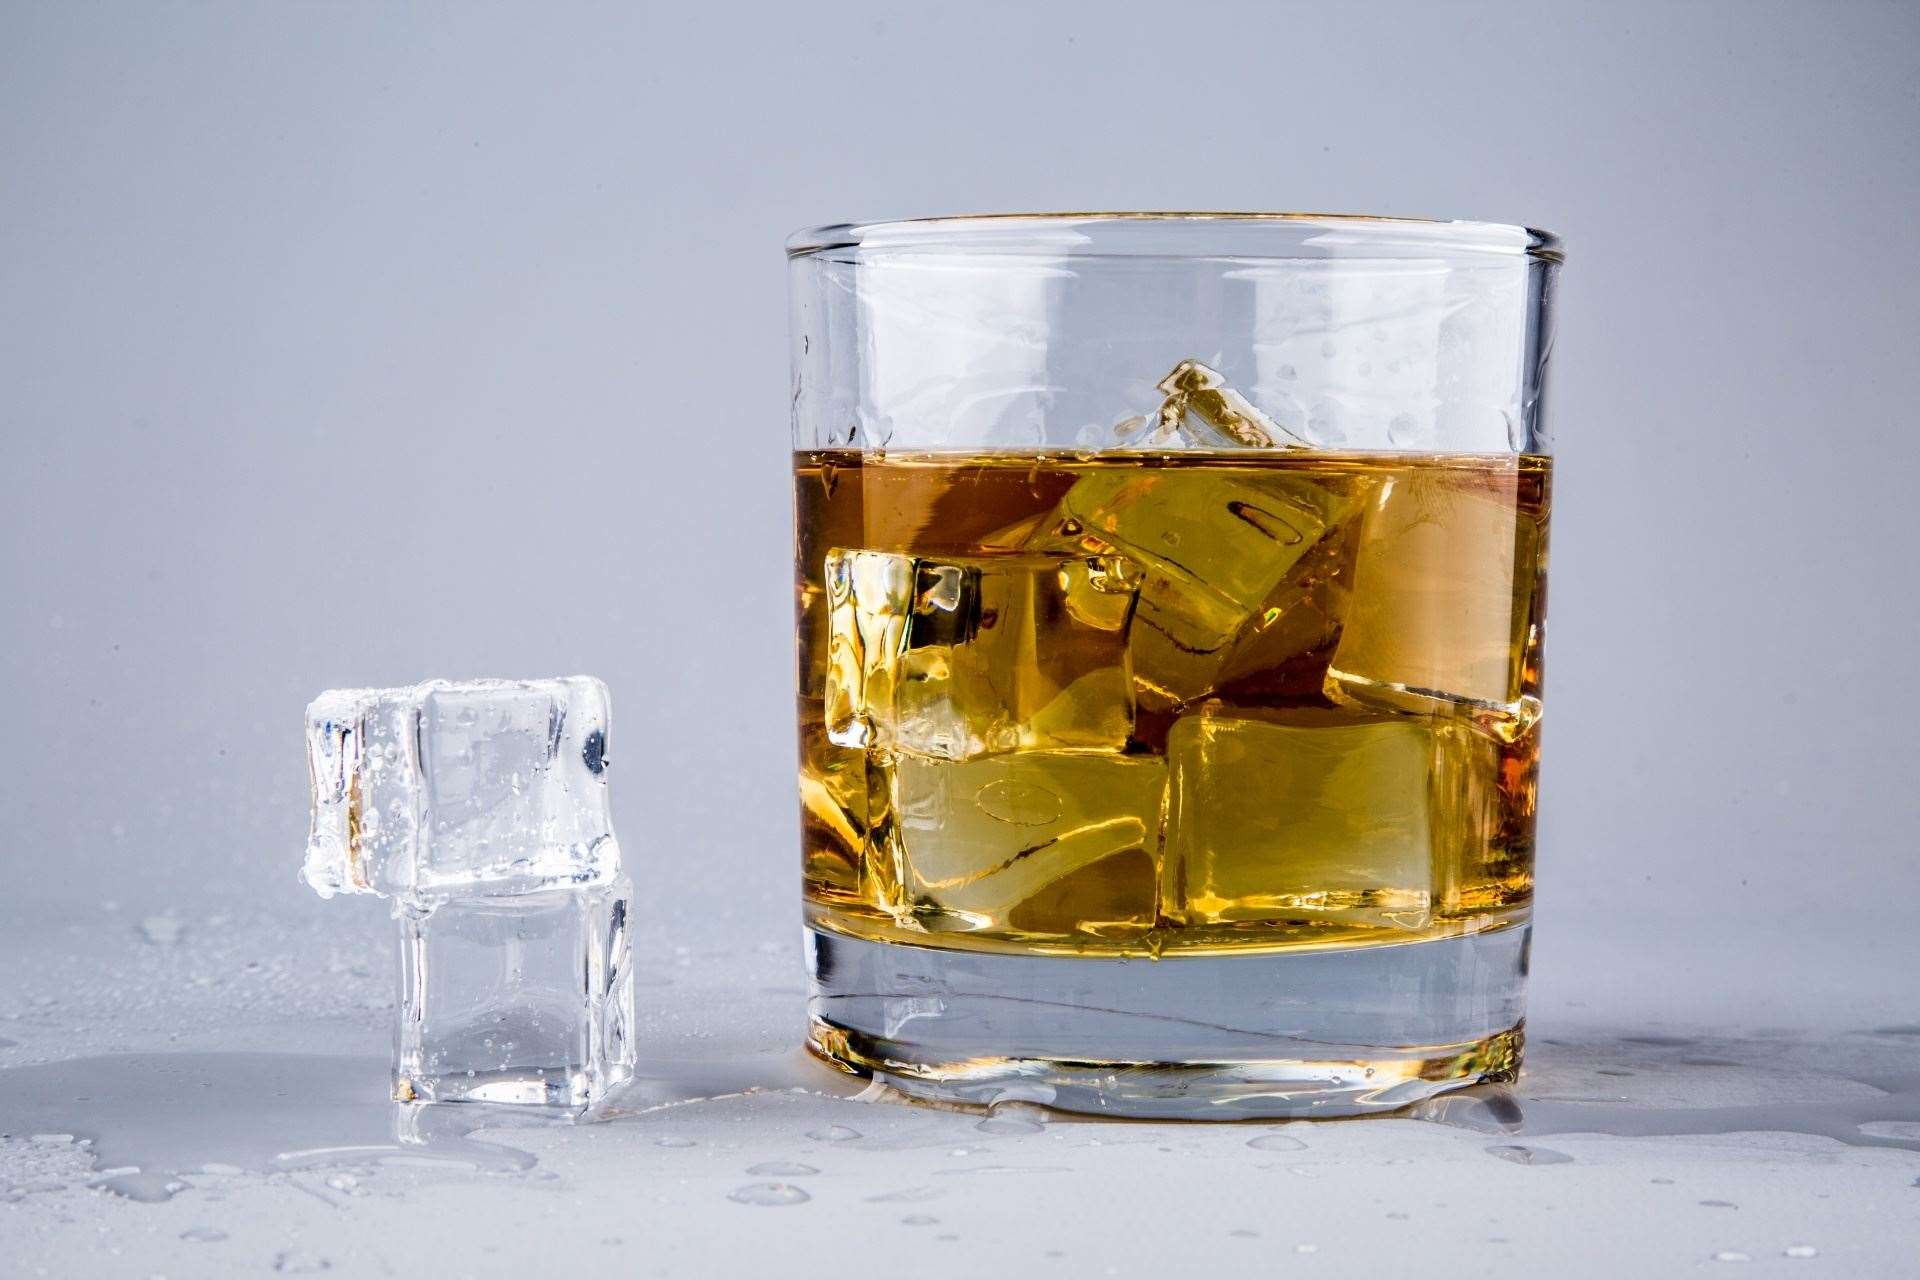 Whisky Over Ice will be hosted at Inverness Ice Centre on August 27.